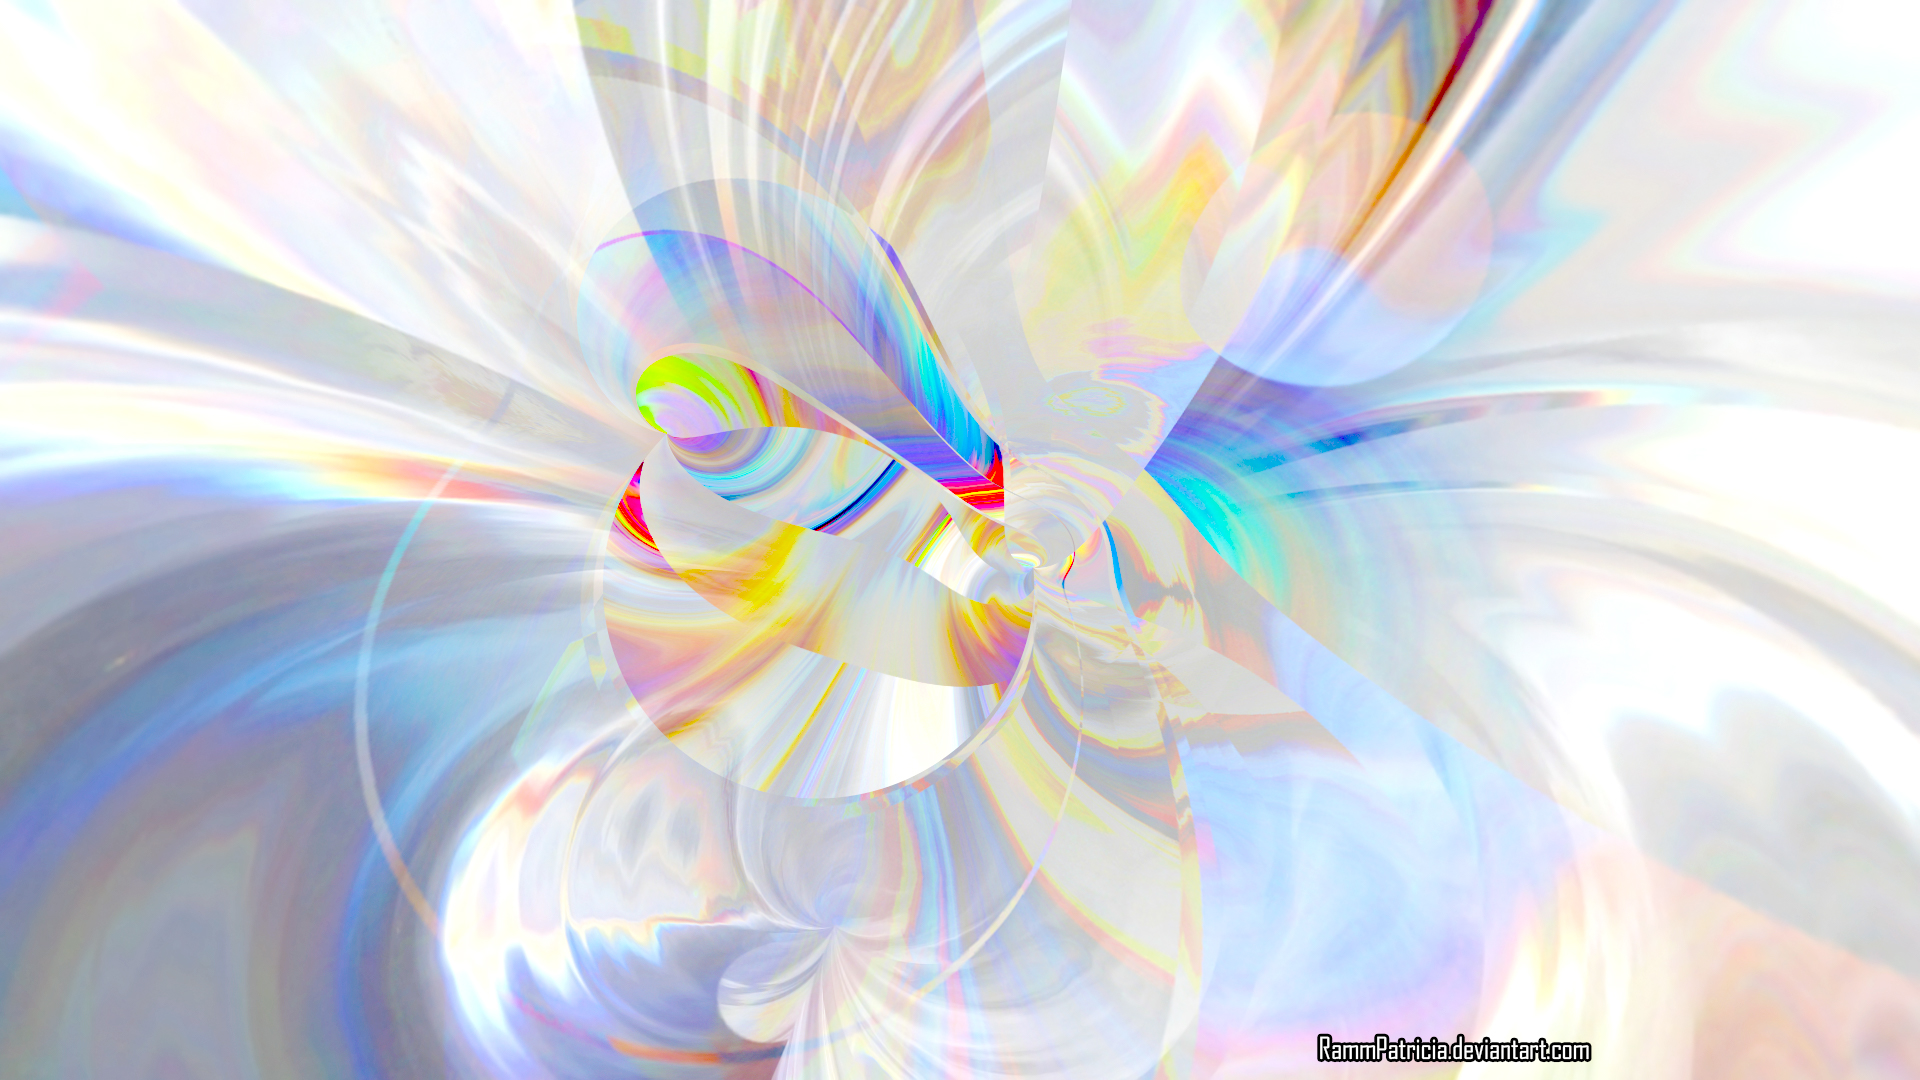 RammPatricia Abstract Digital Digital Art Colorful Watermarked Prism Iridescent 1920x1080